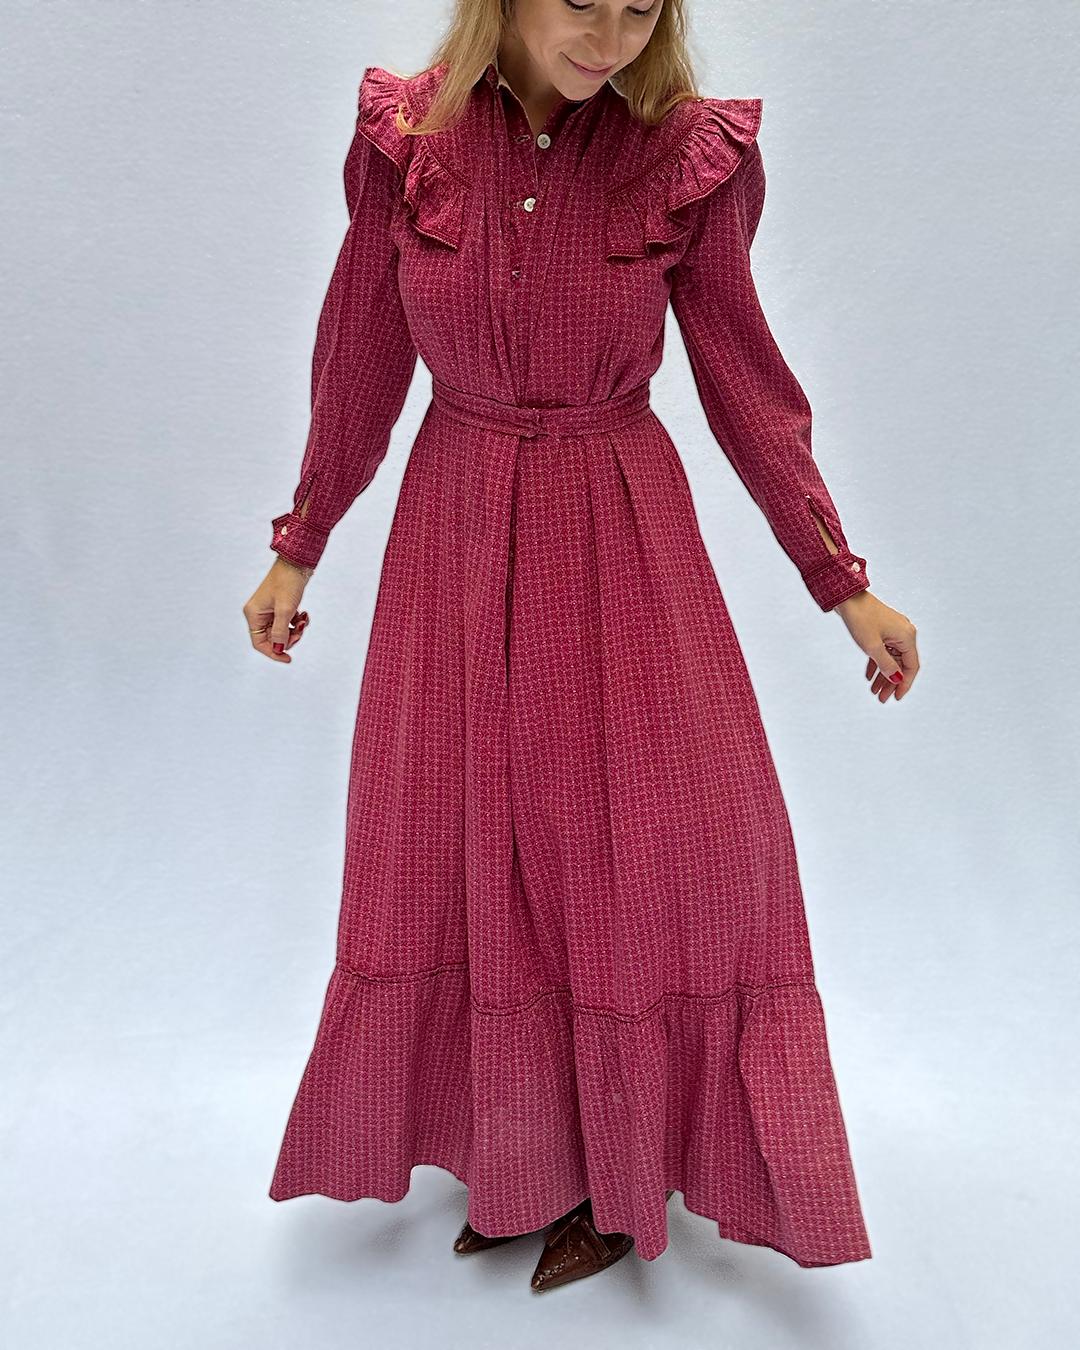 I am so excited to share this incredibly rare Victorian calico dress; it's so difficult to find clothing from this era in a wearable condition, and this dress is just lovely. Circa 1880s, this is what was known as a 